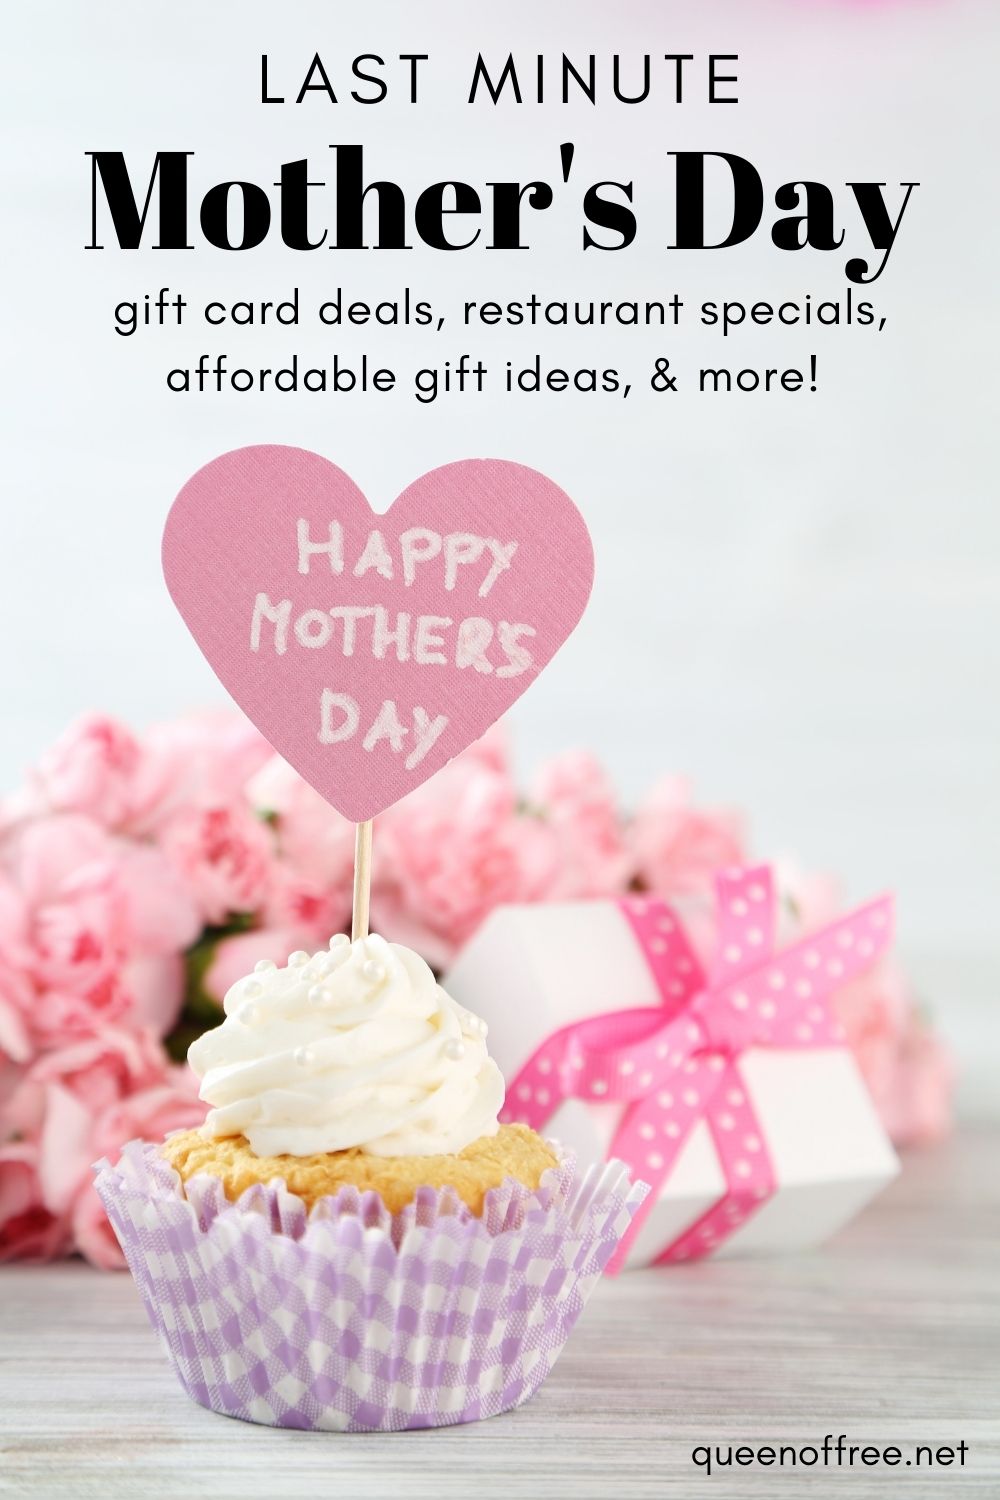 Make mom proud by making the most of your budget. Check out Mother's Day FREE and Affordable Gift Ideas for 2022!